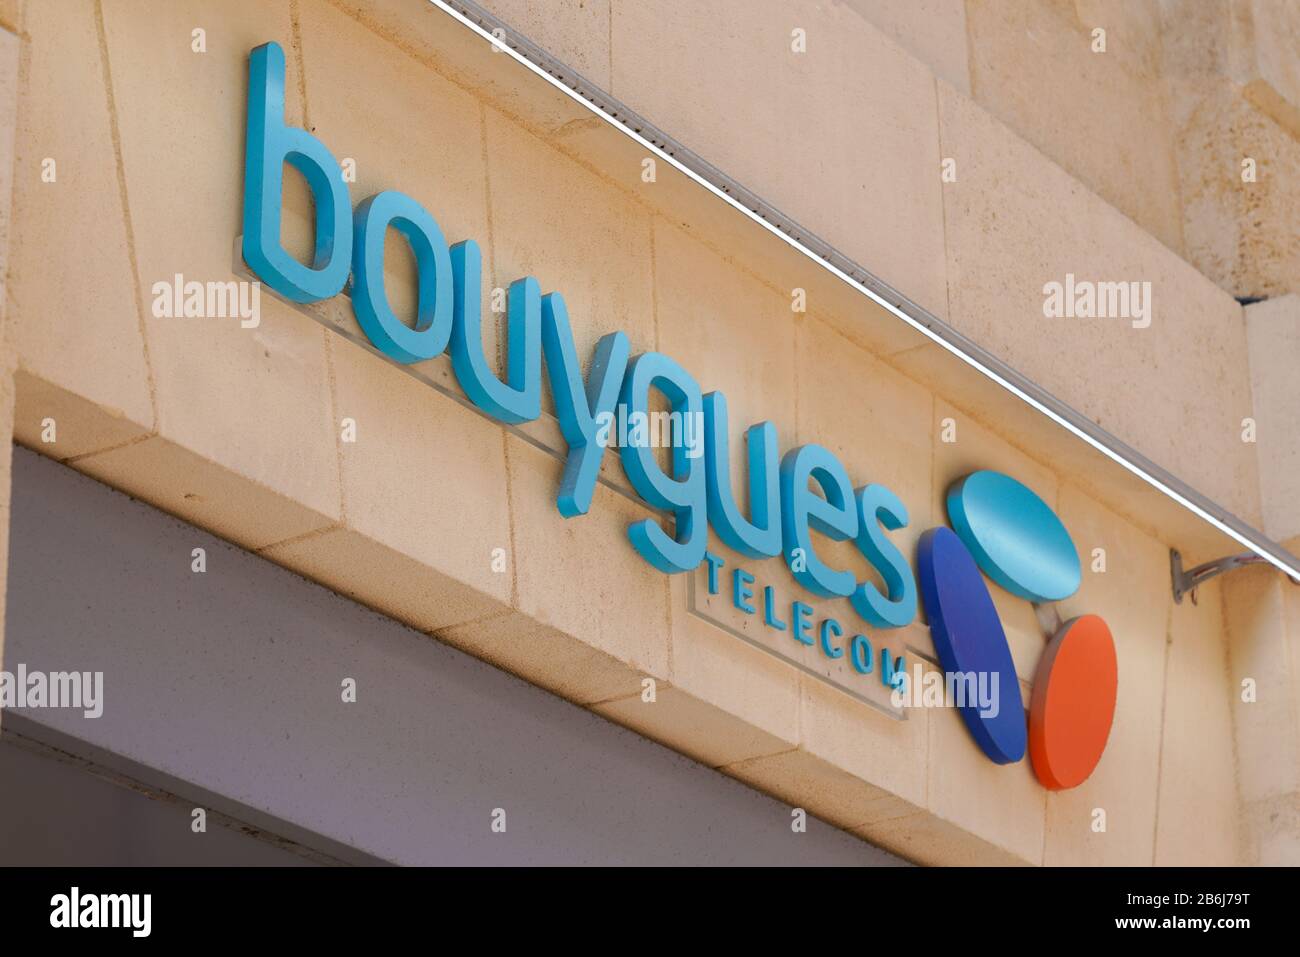 Bordeaux , Aquitaine / France - 09 18 2019 : shop Bouygues telecom logo on store front in the street Stock Photo